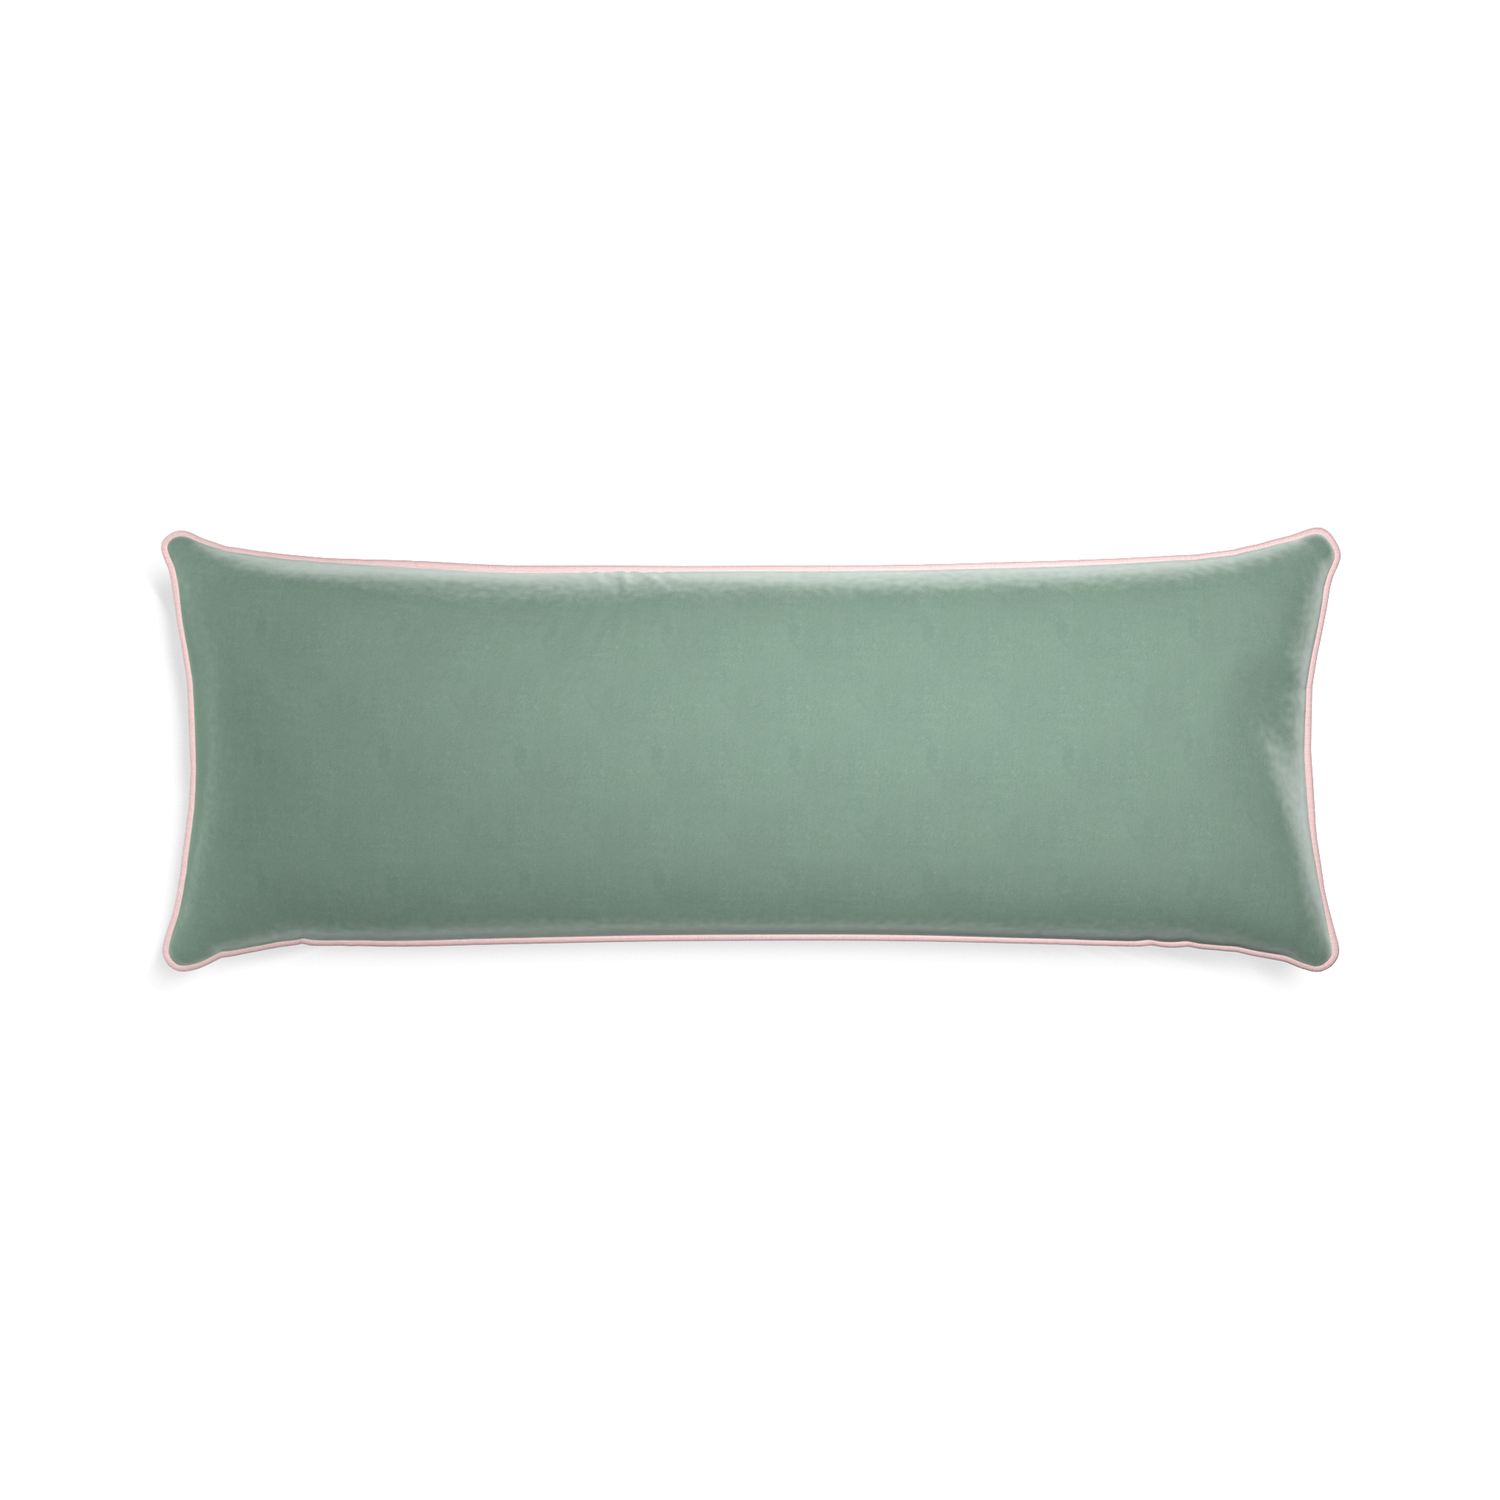 rectangle blue green velvet pillow with light pink piping